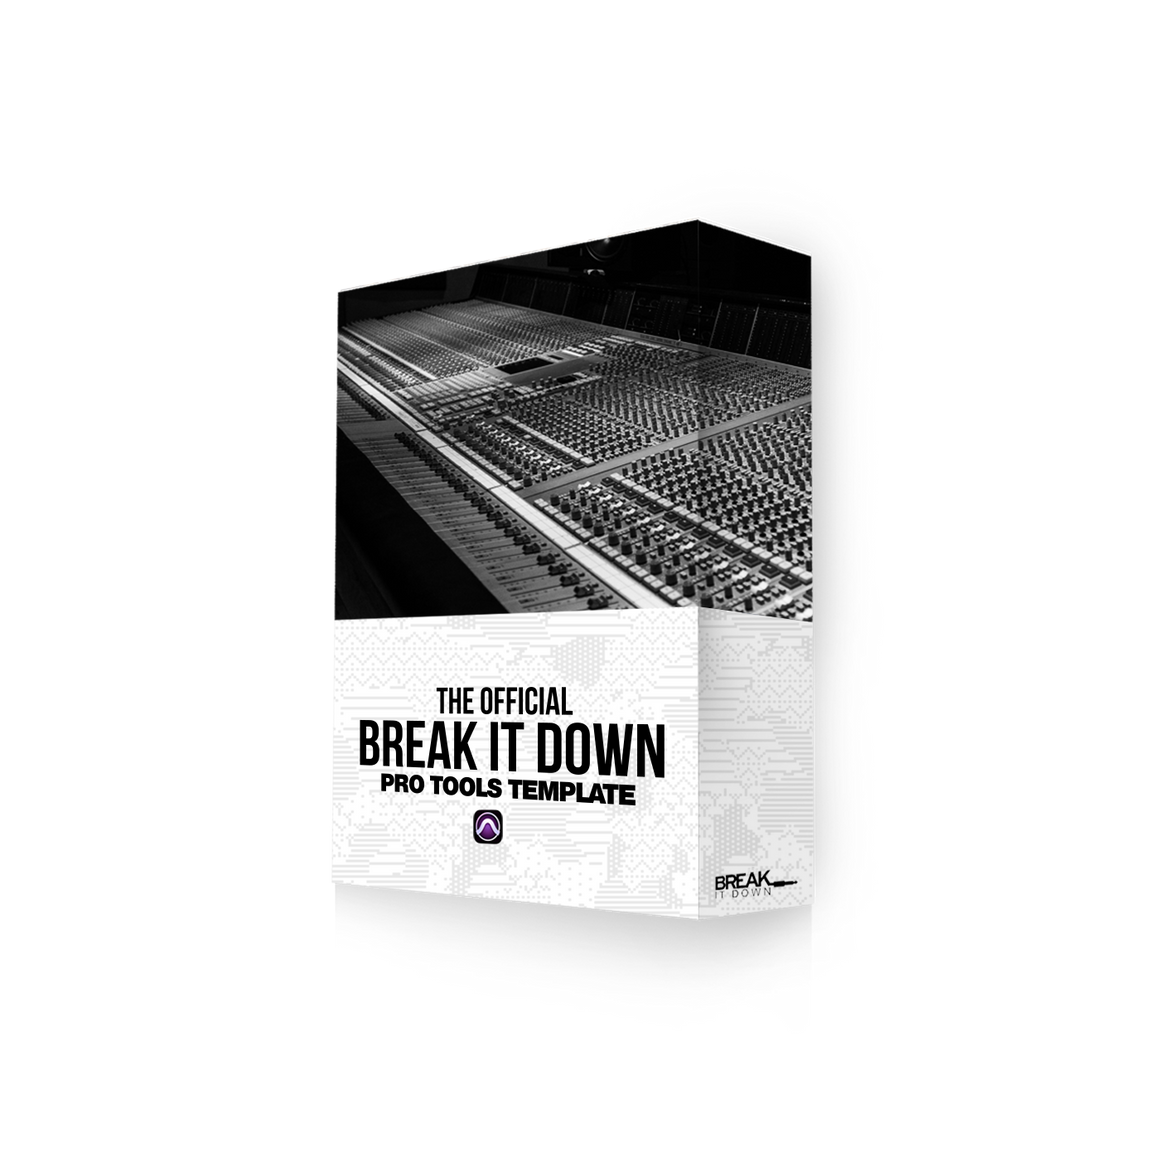 Break It Down - Break It Down  - Drum Kit Break It Down Pro Tools Template - Dreamchasers